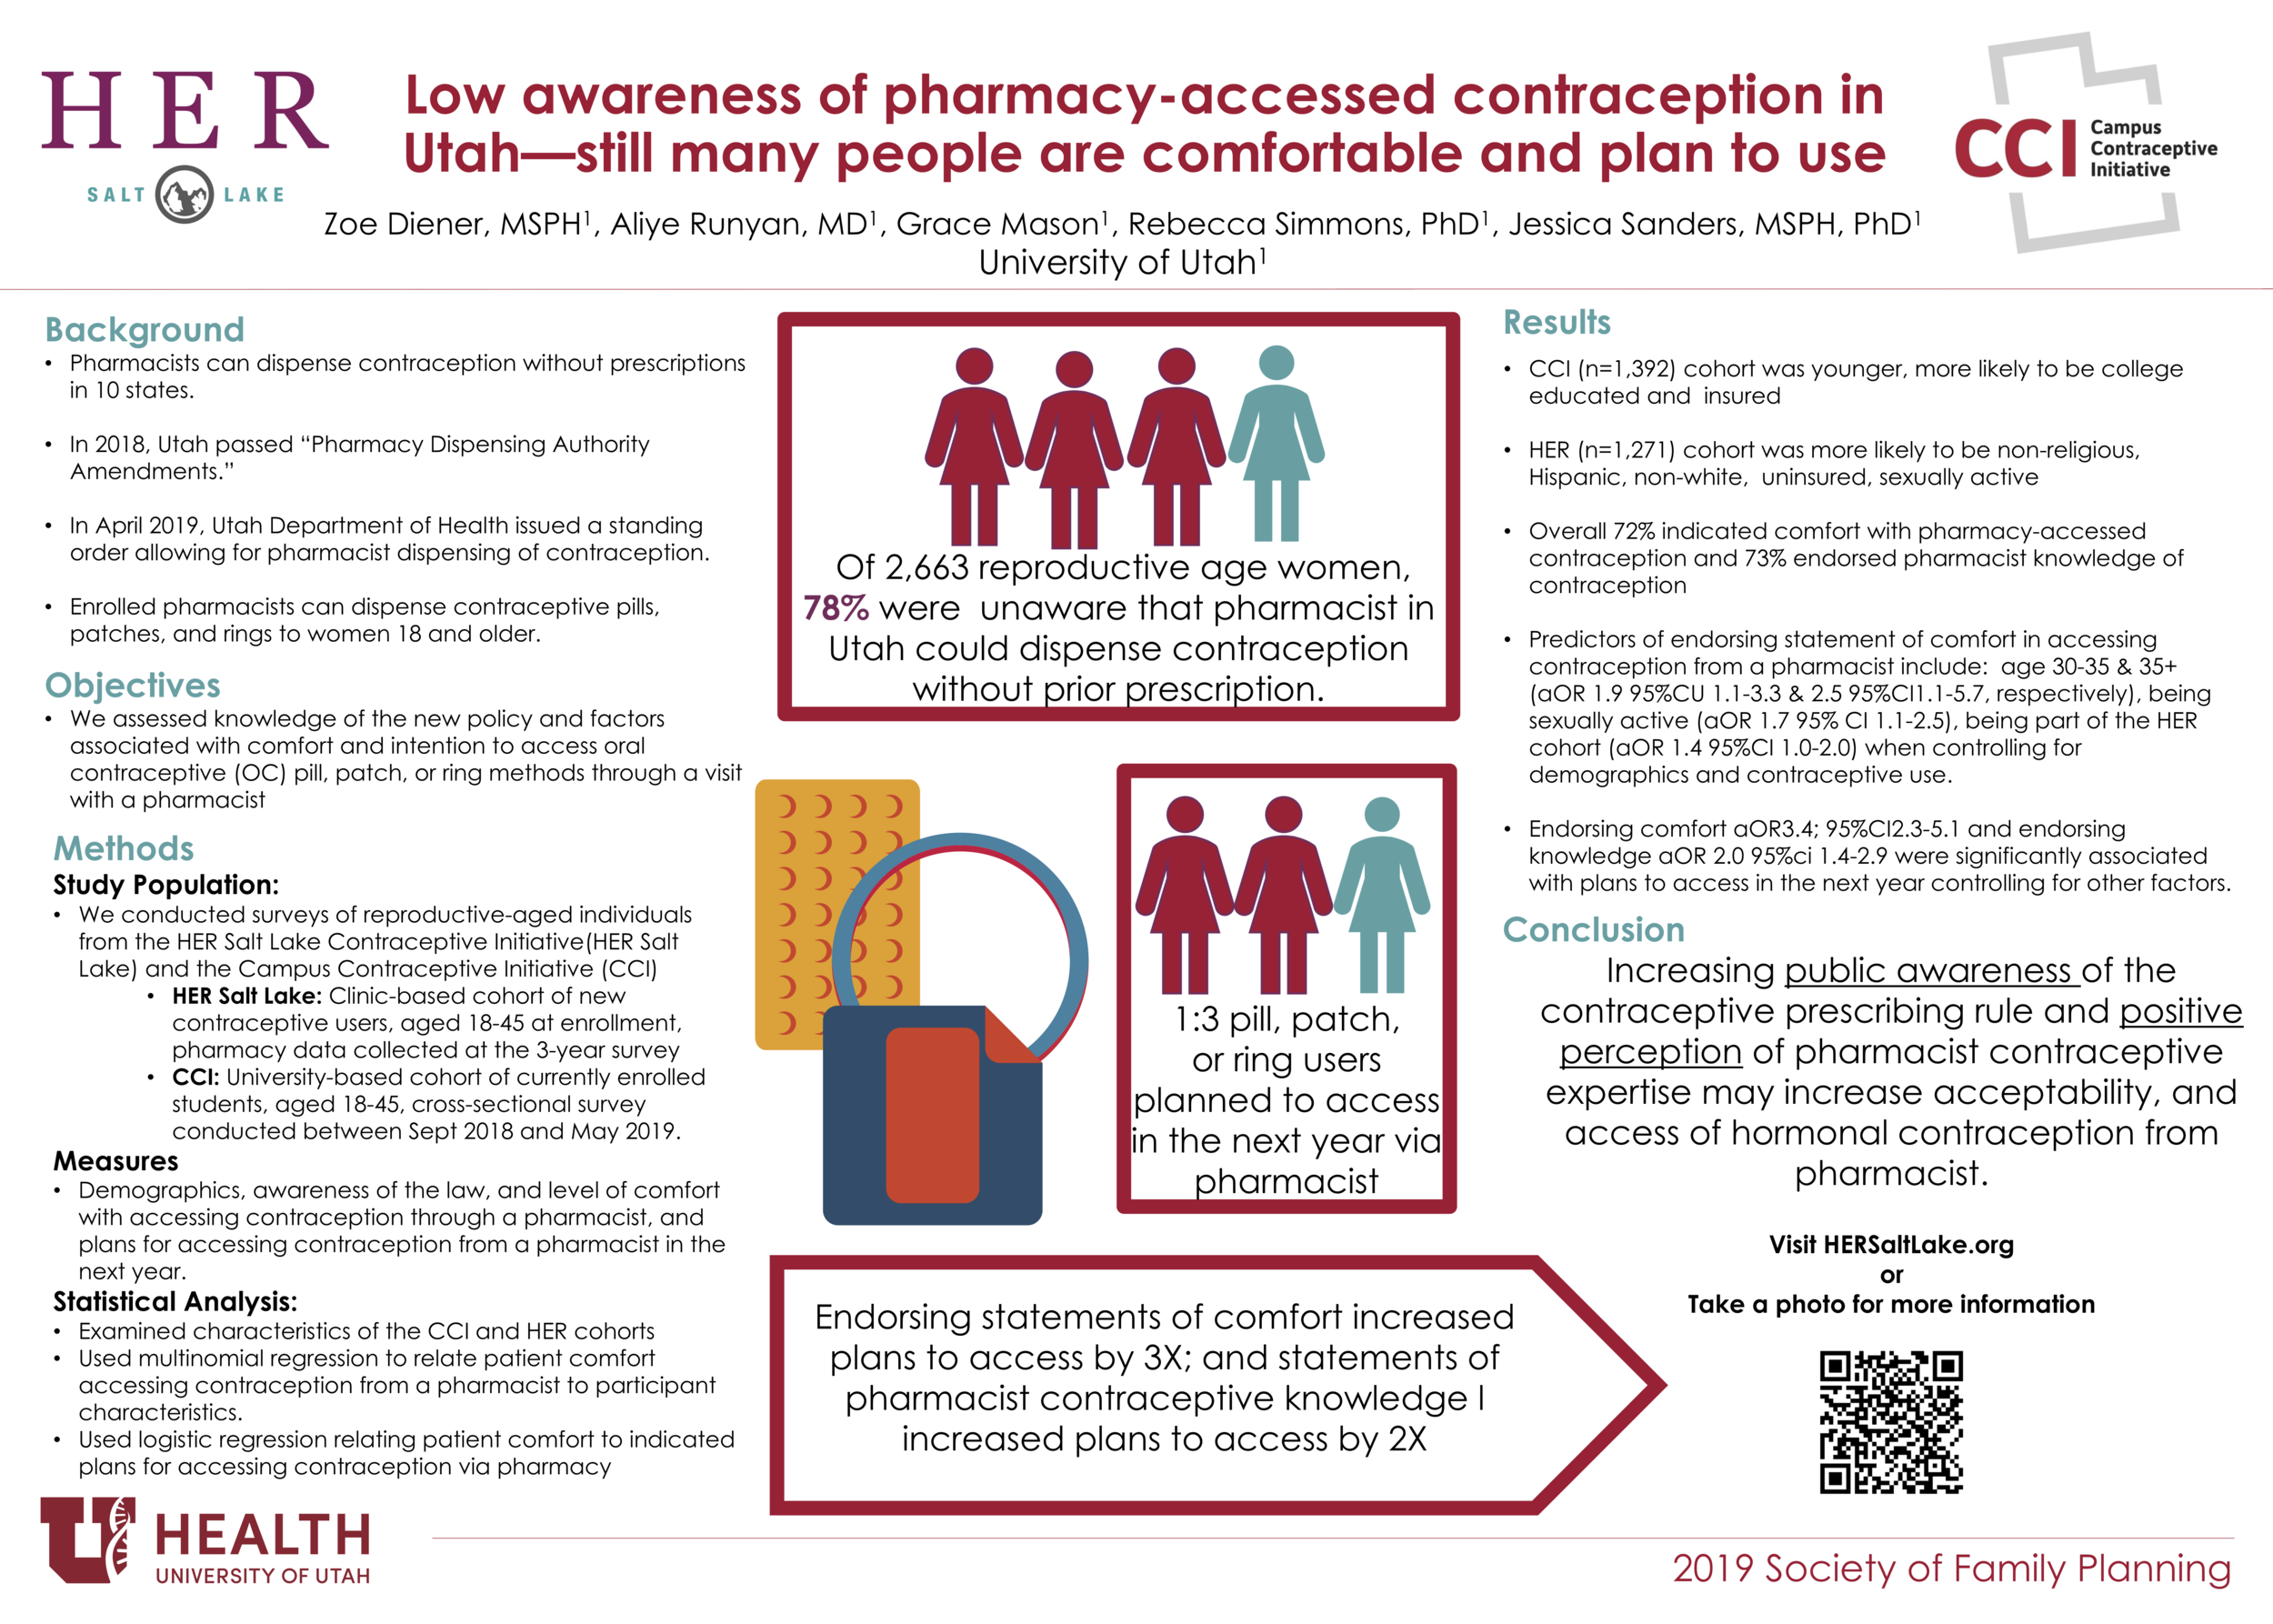 Low awareness of pharmacy-accessed contraception in Utah - still many people are comfortable and ready to use